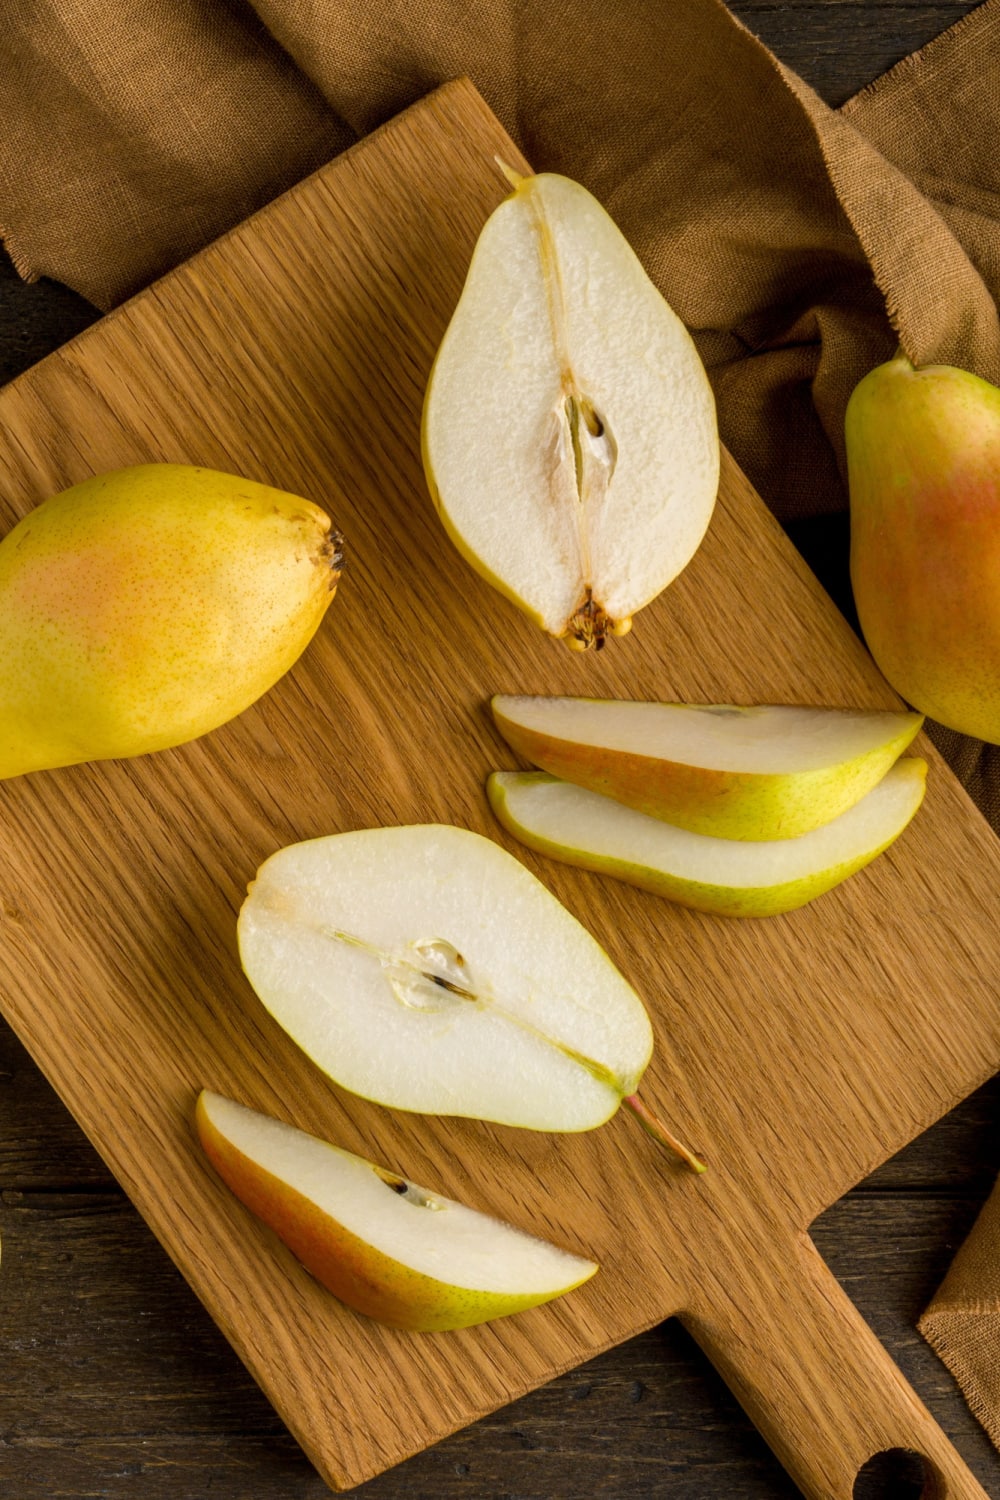 Pears sliced in halves on top of a wooden board.